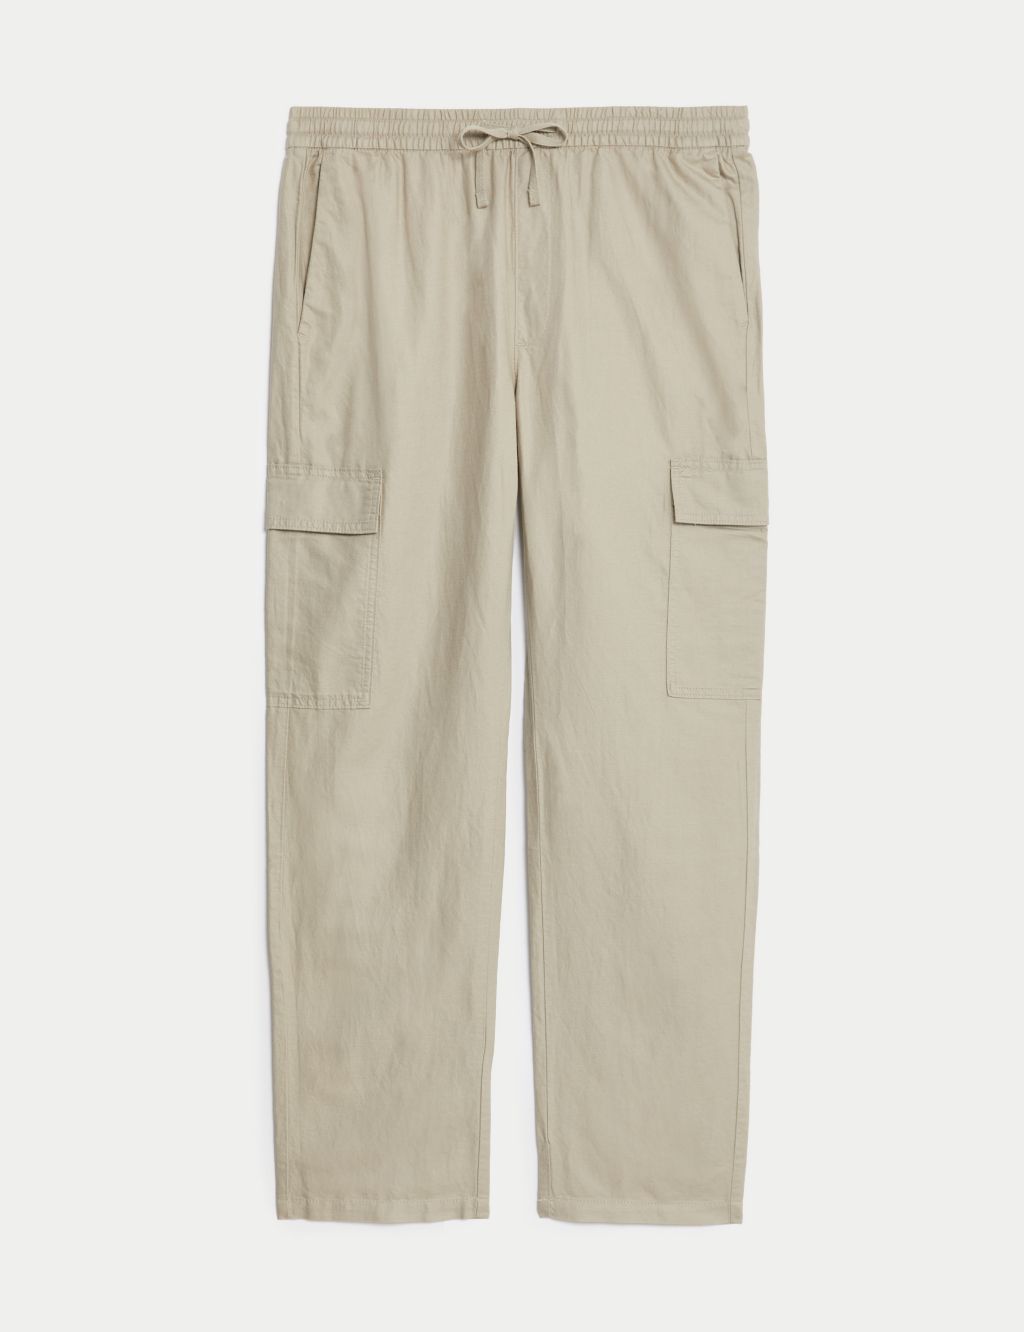 Tapered Fit Linen Blend Cargo Trousers image 2